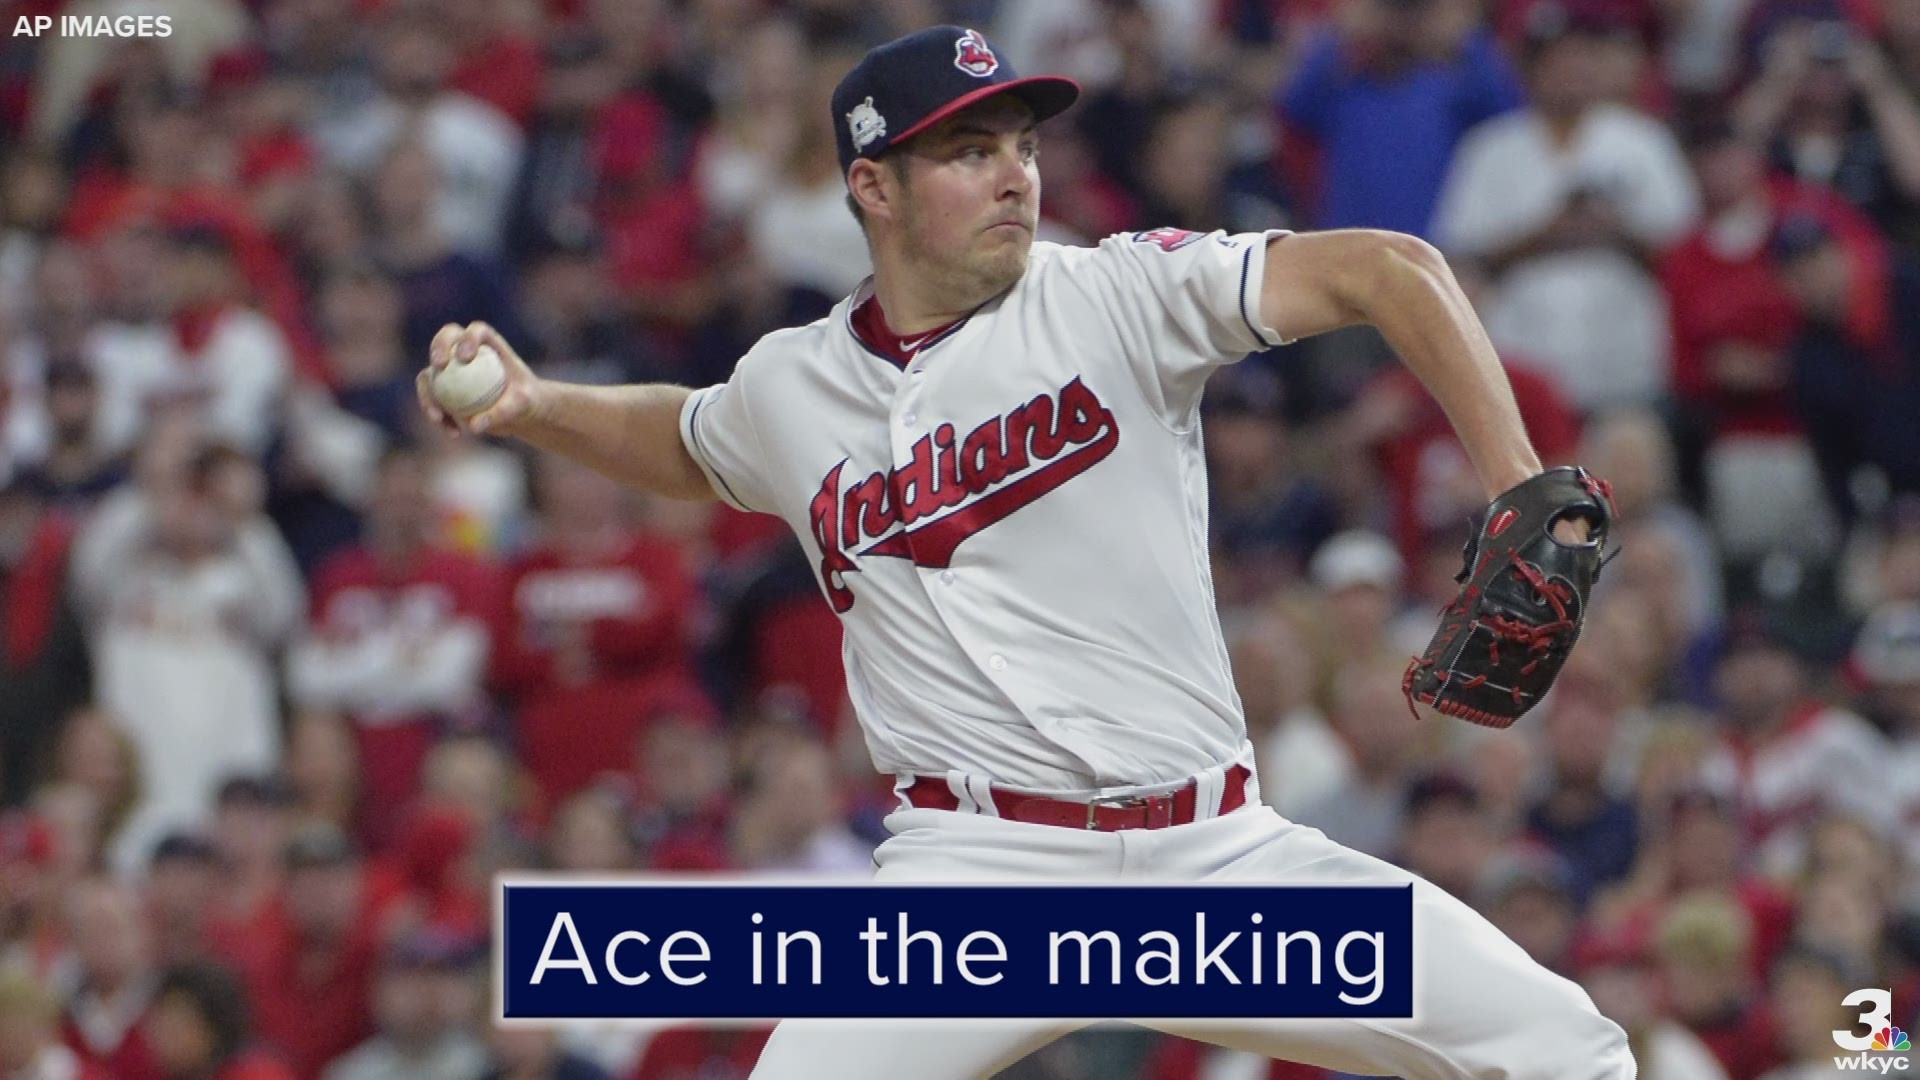 One month into the 2019 season, Cleveland Indians starting pitcher Trevor Bauer has already emerged as the American League Cy Young favorite.